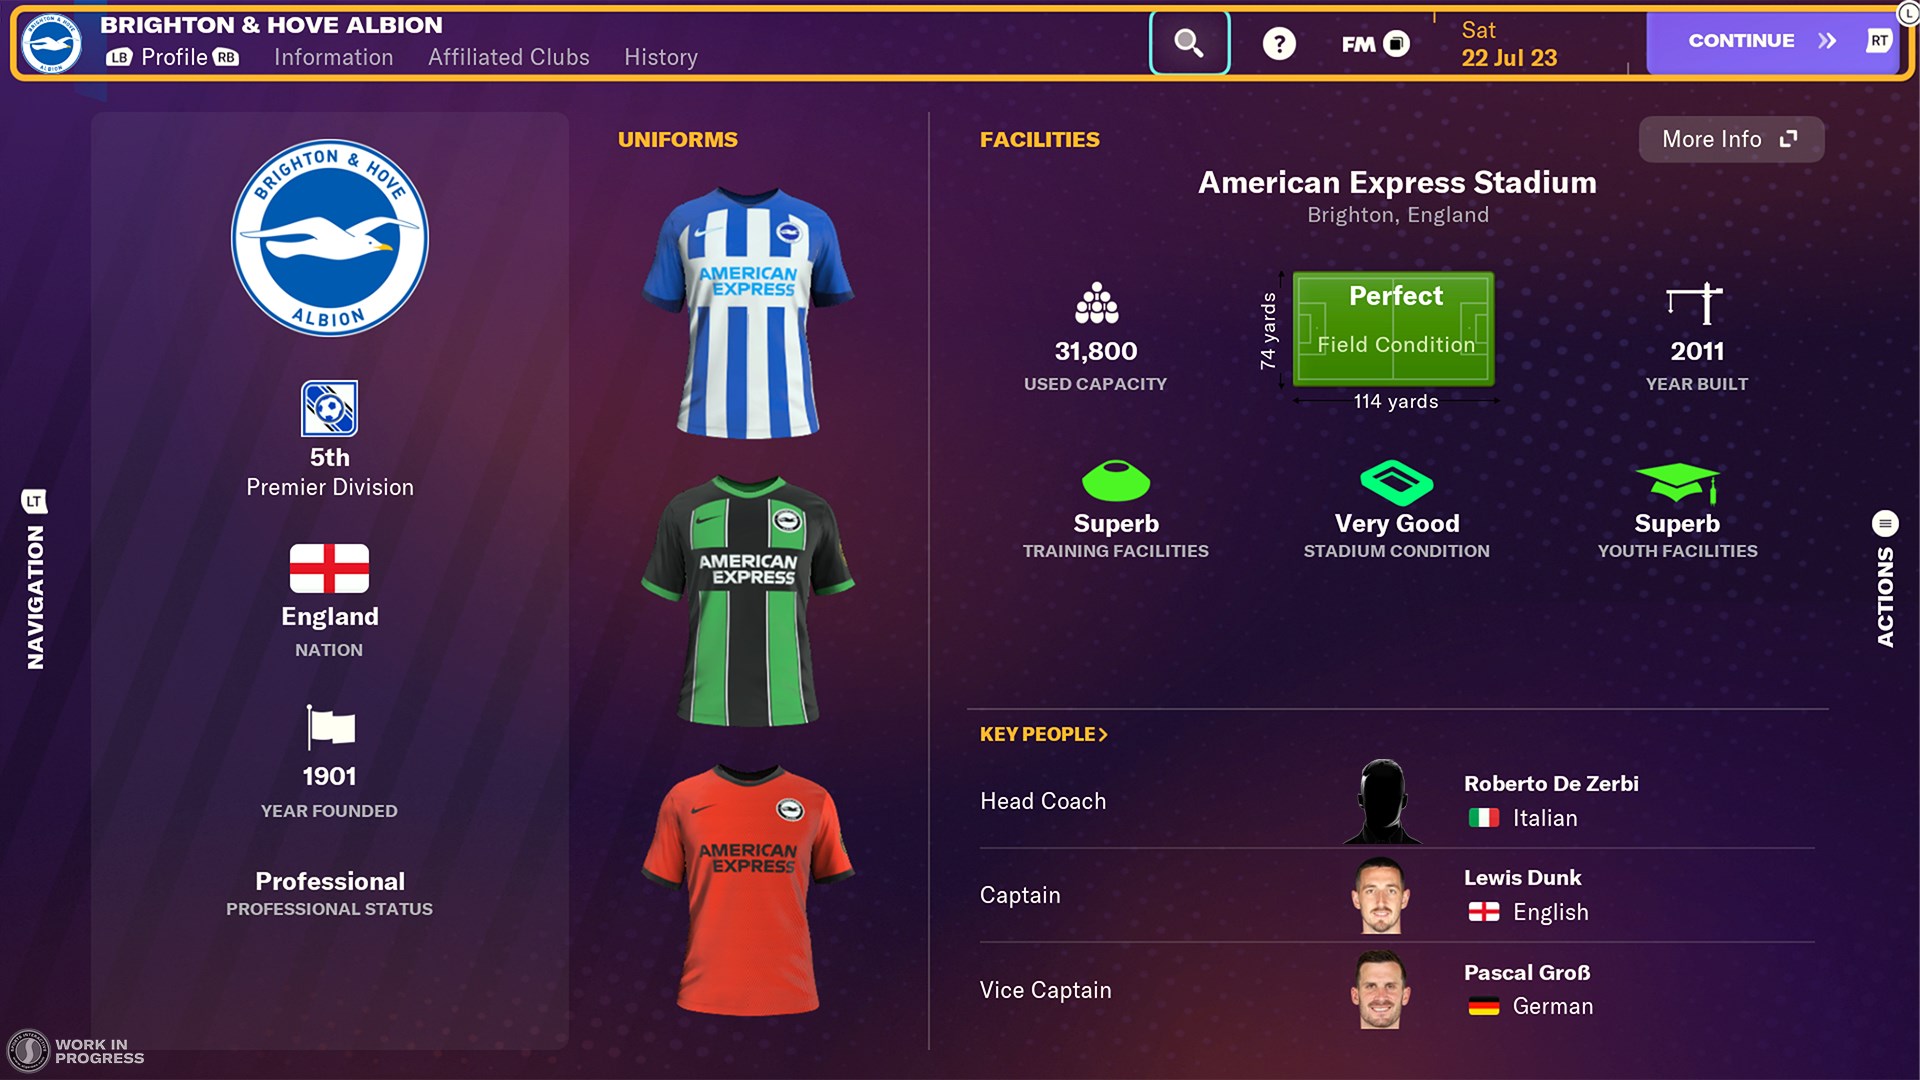 for android download Football Manager 2024 Touch